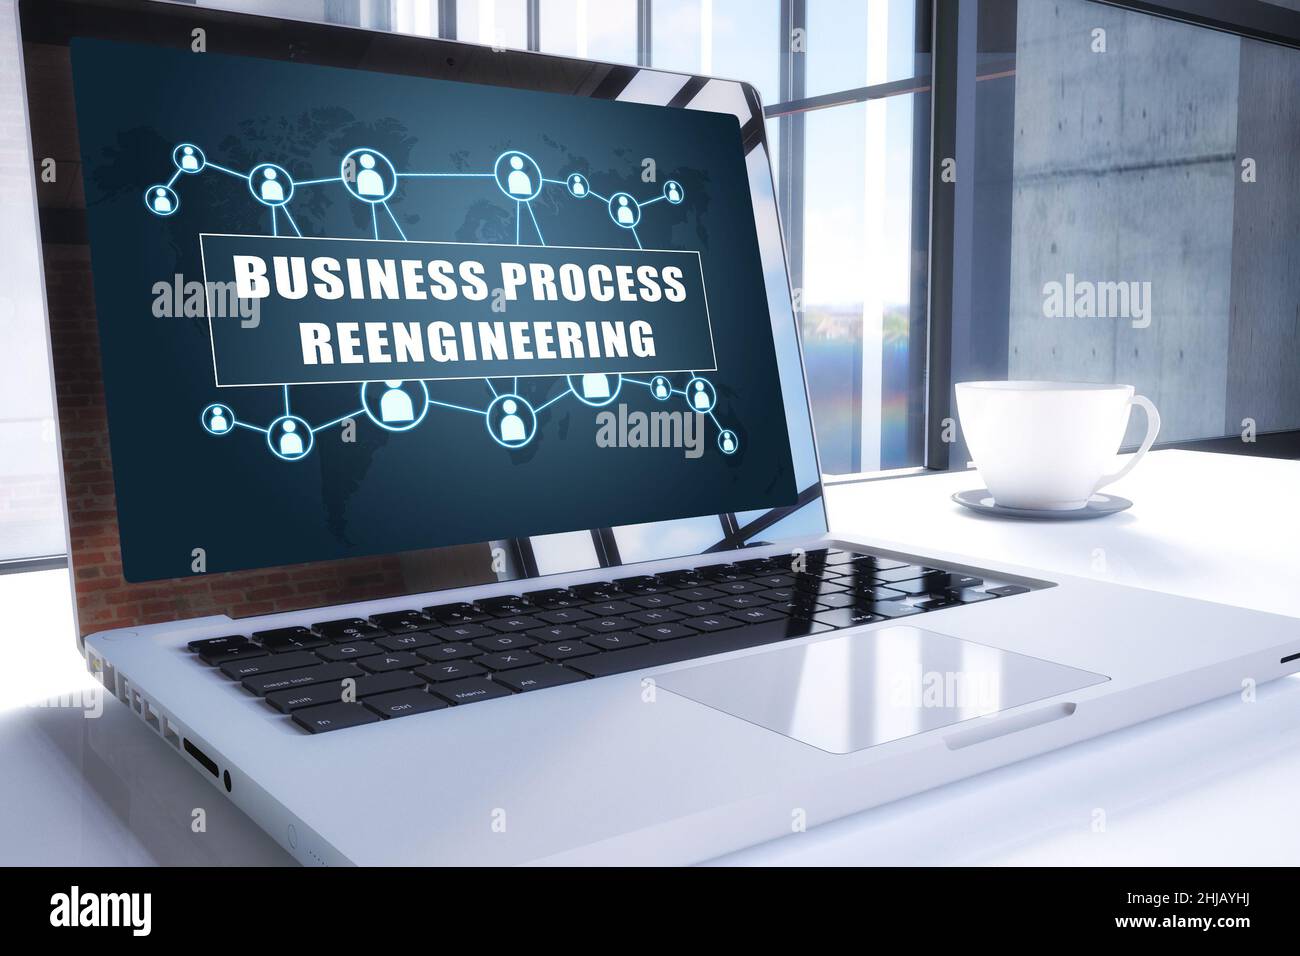 Business Process Reengineering text on modern laptop screen in office environment. 3D render illustration business text concept. Stock Photo